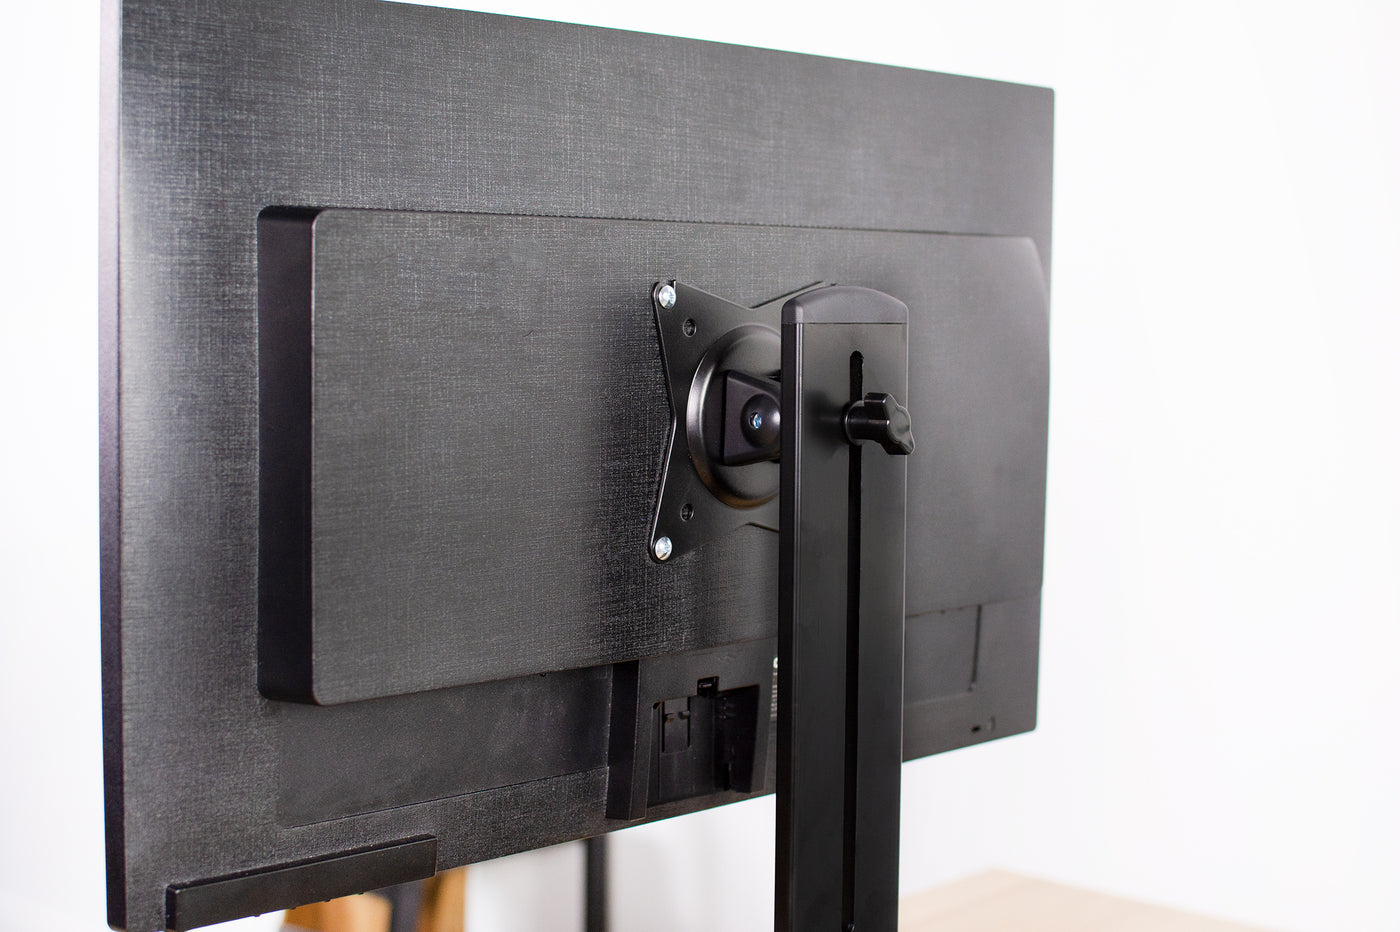 Securely mount your monitor with a steel face VESA plate adapter bracket.